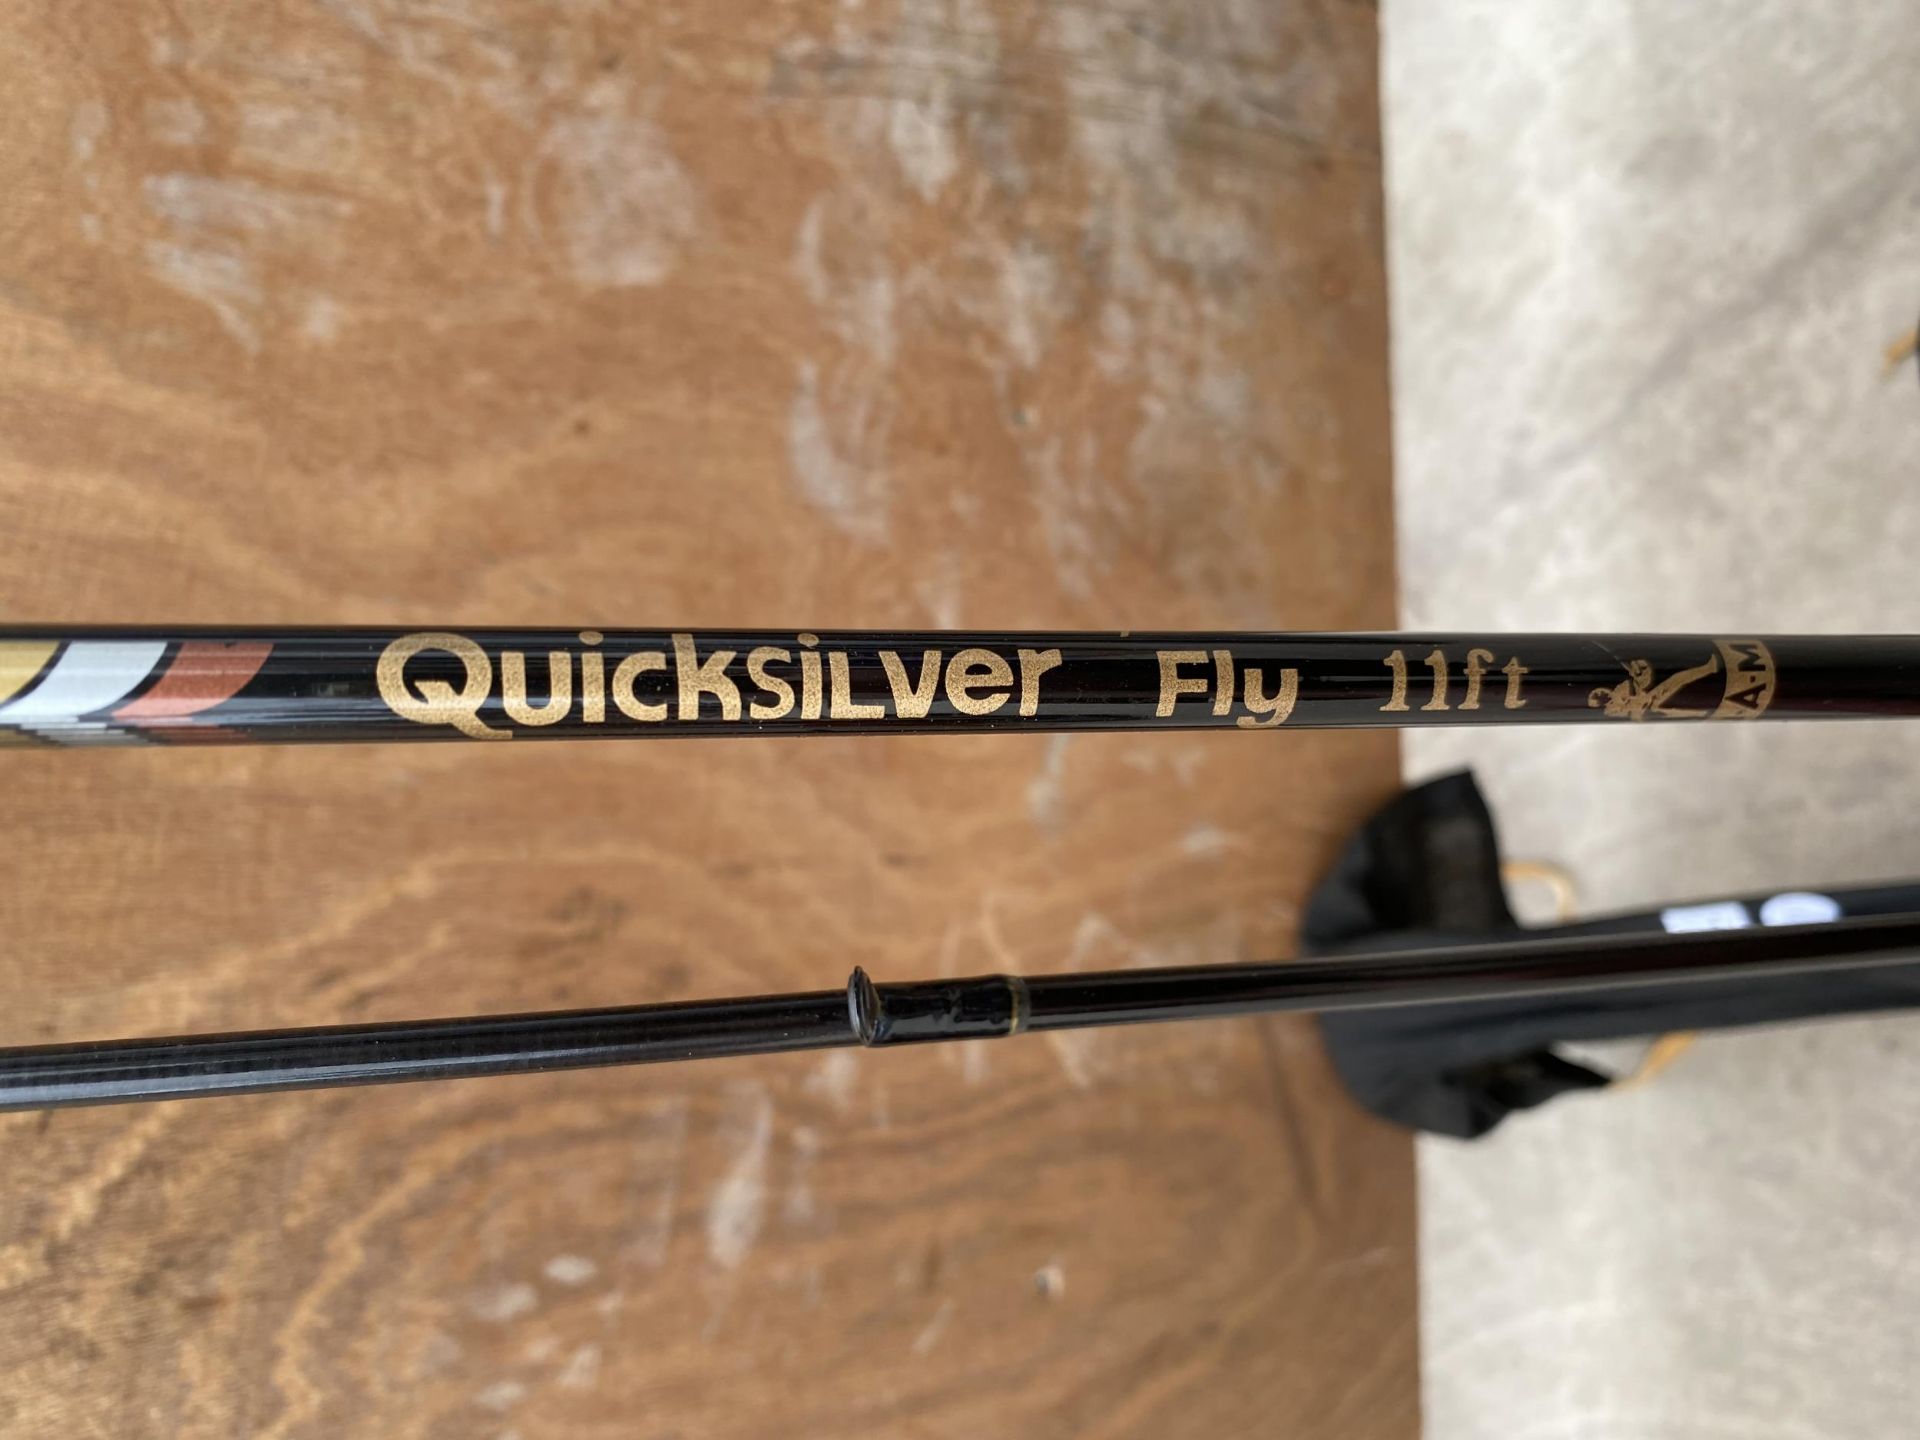 A DAM QUICKSILVER 11FT FLY FISHING ROD AFTMA 5-7 - Image 4 of 5